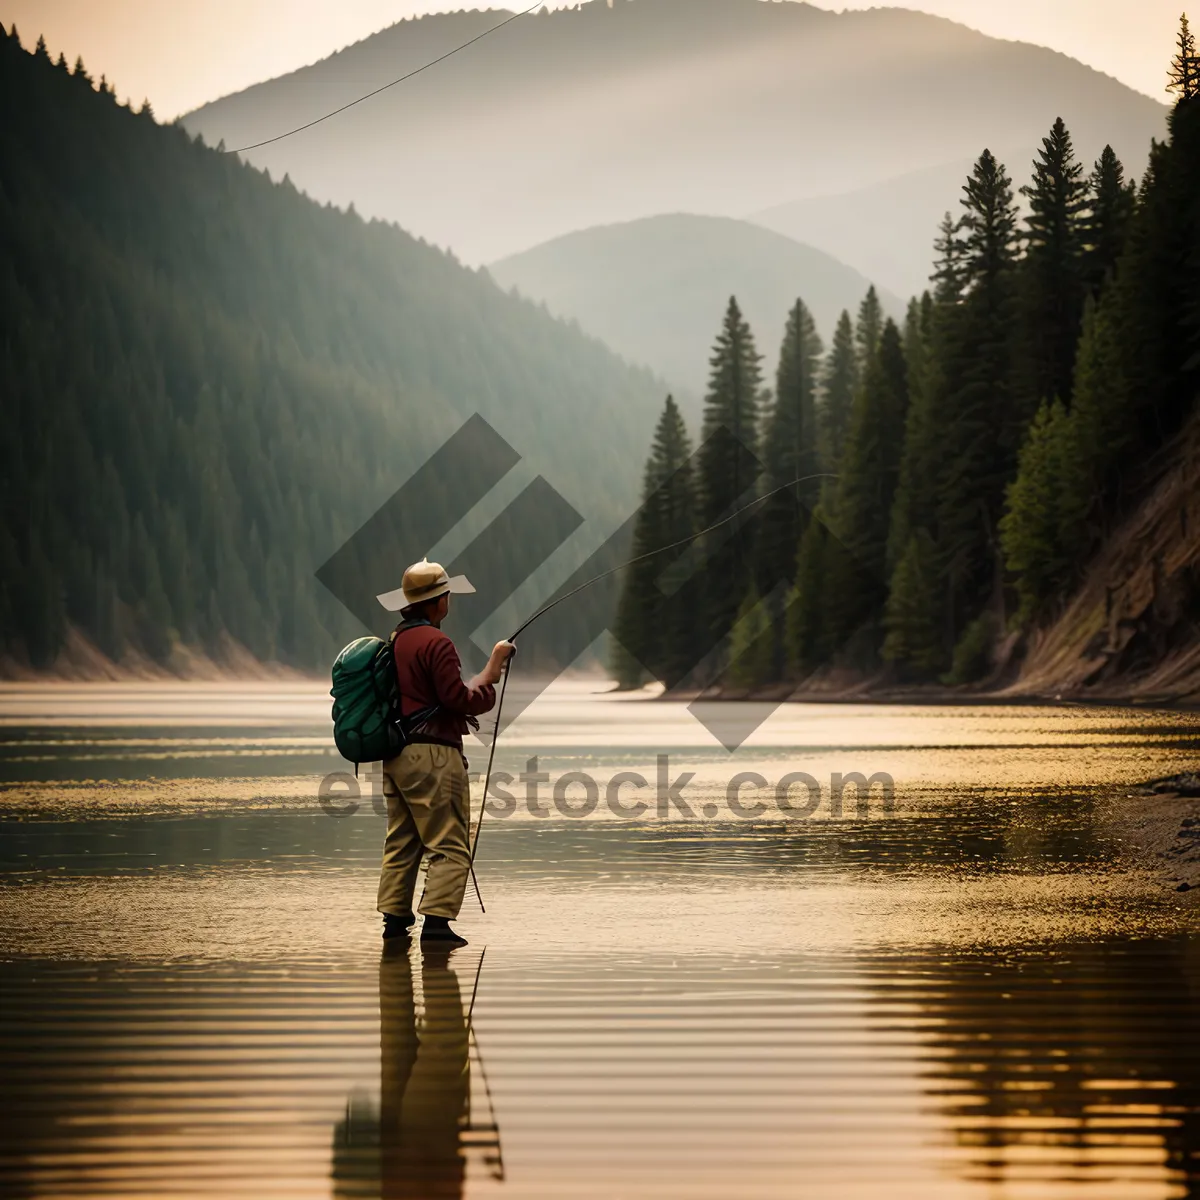 Picture of Man riding unicycle by river, surrounded by mountains.